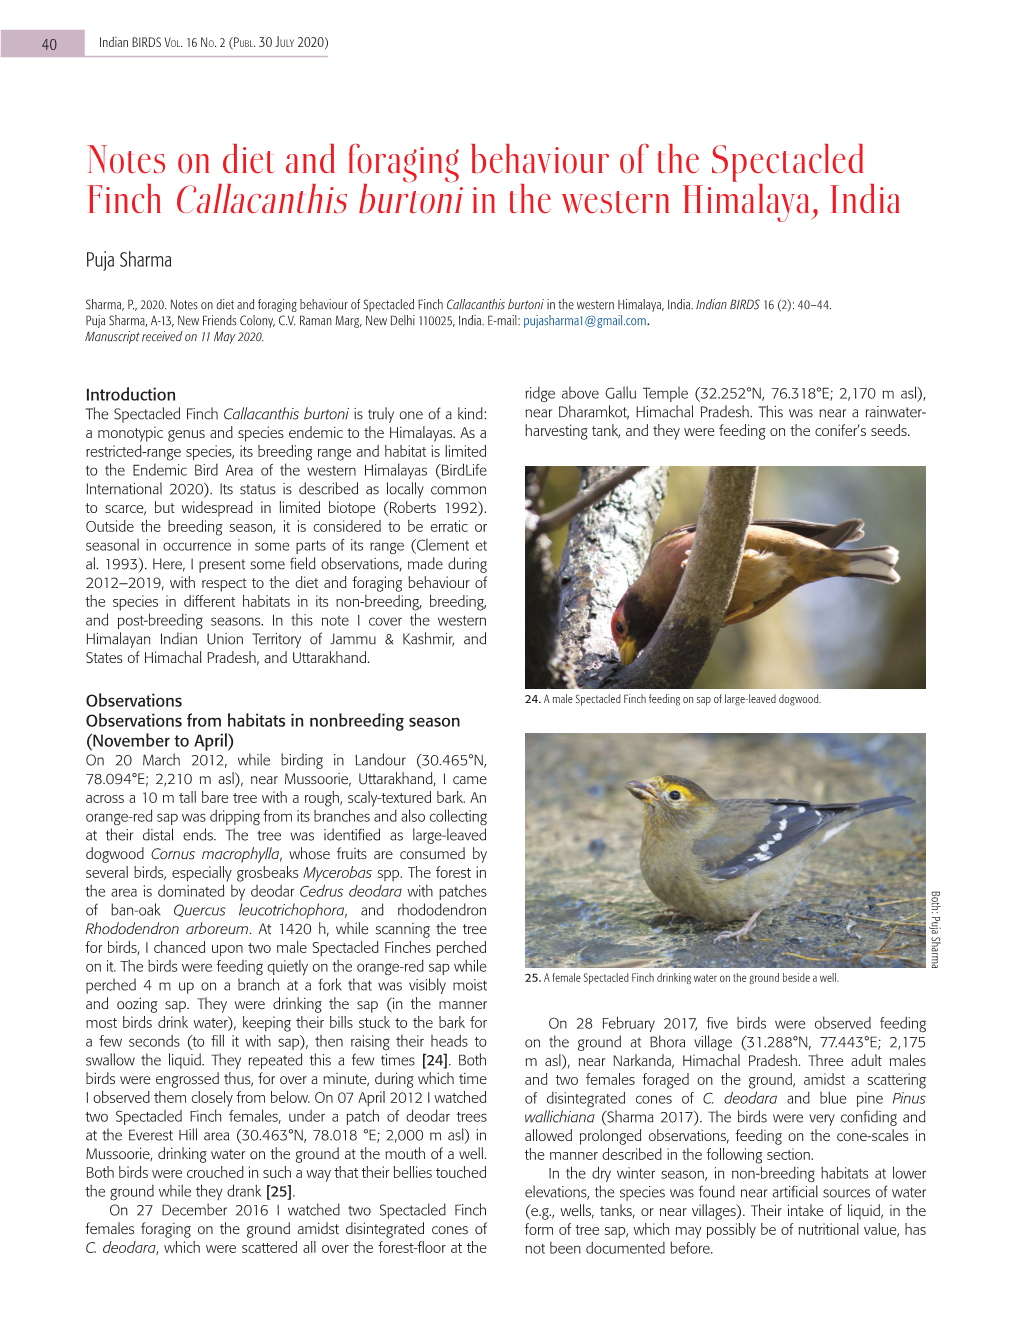 Notes on Diet and Foraging Behaviour of the Spectacled Finch Callacanthis Burtoni in the Western Himalaya, India